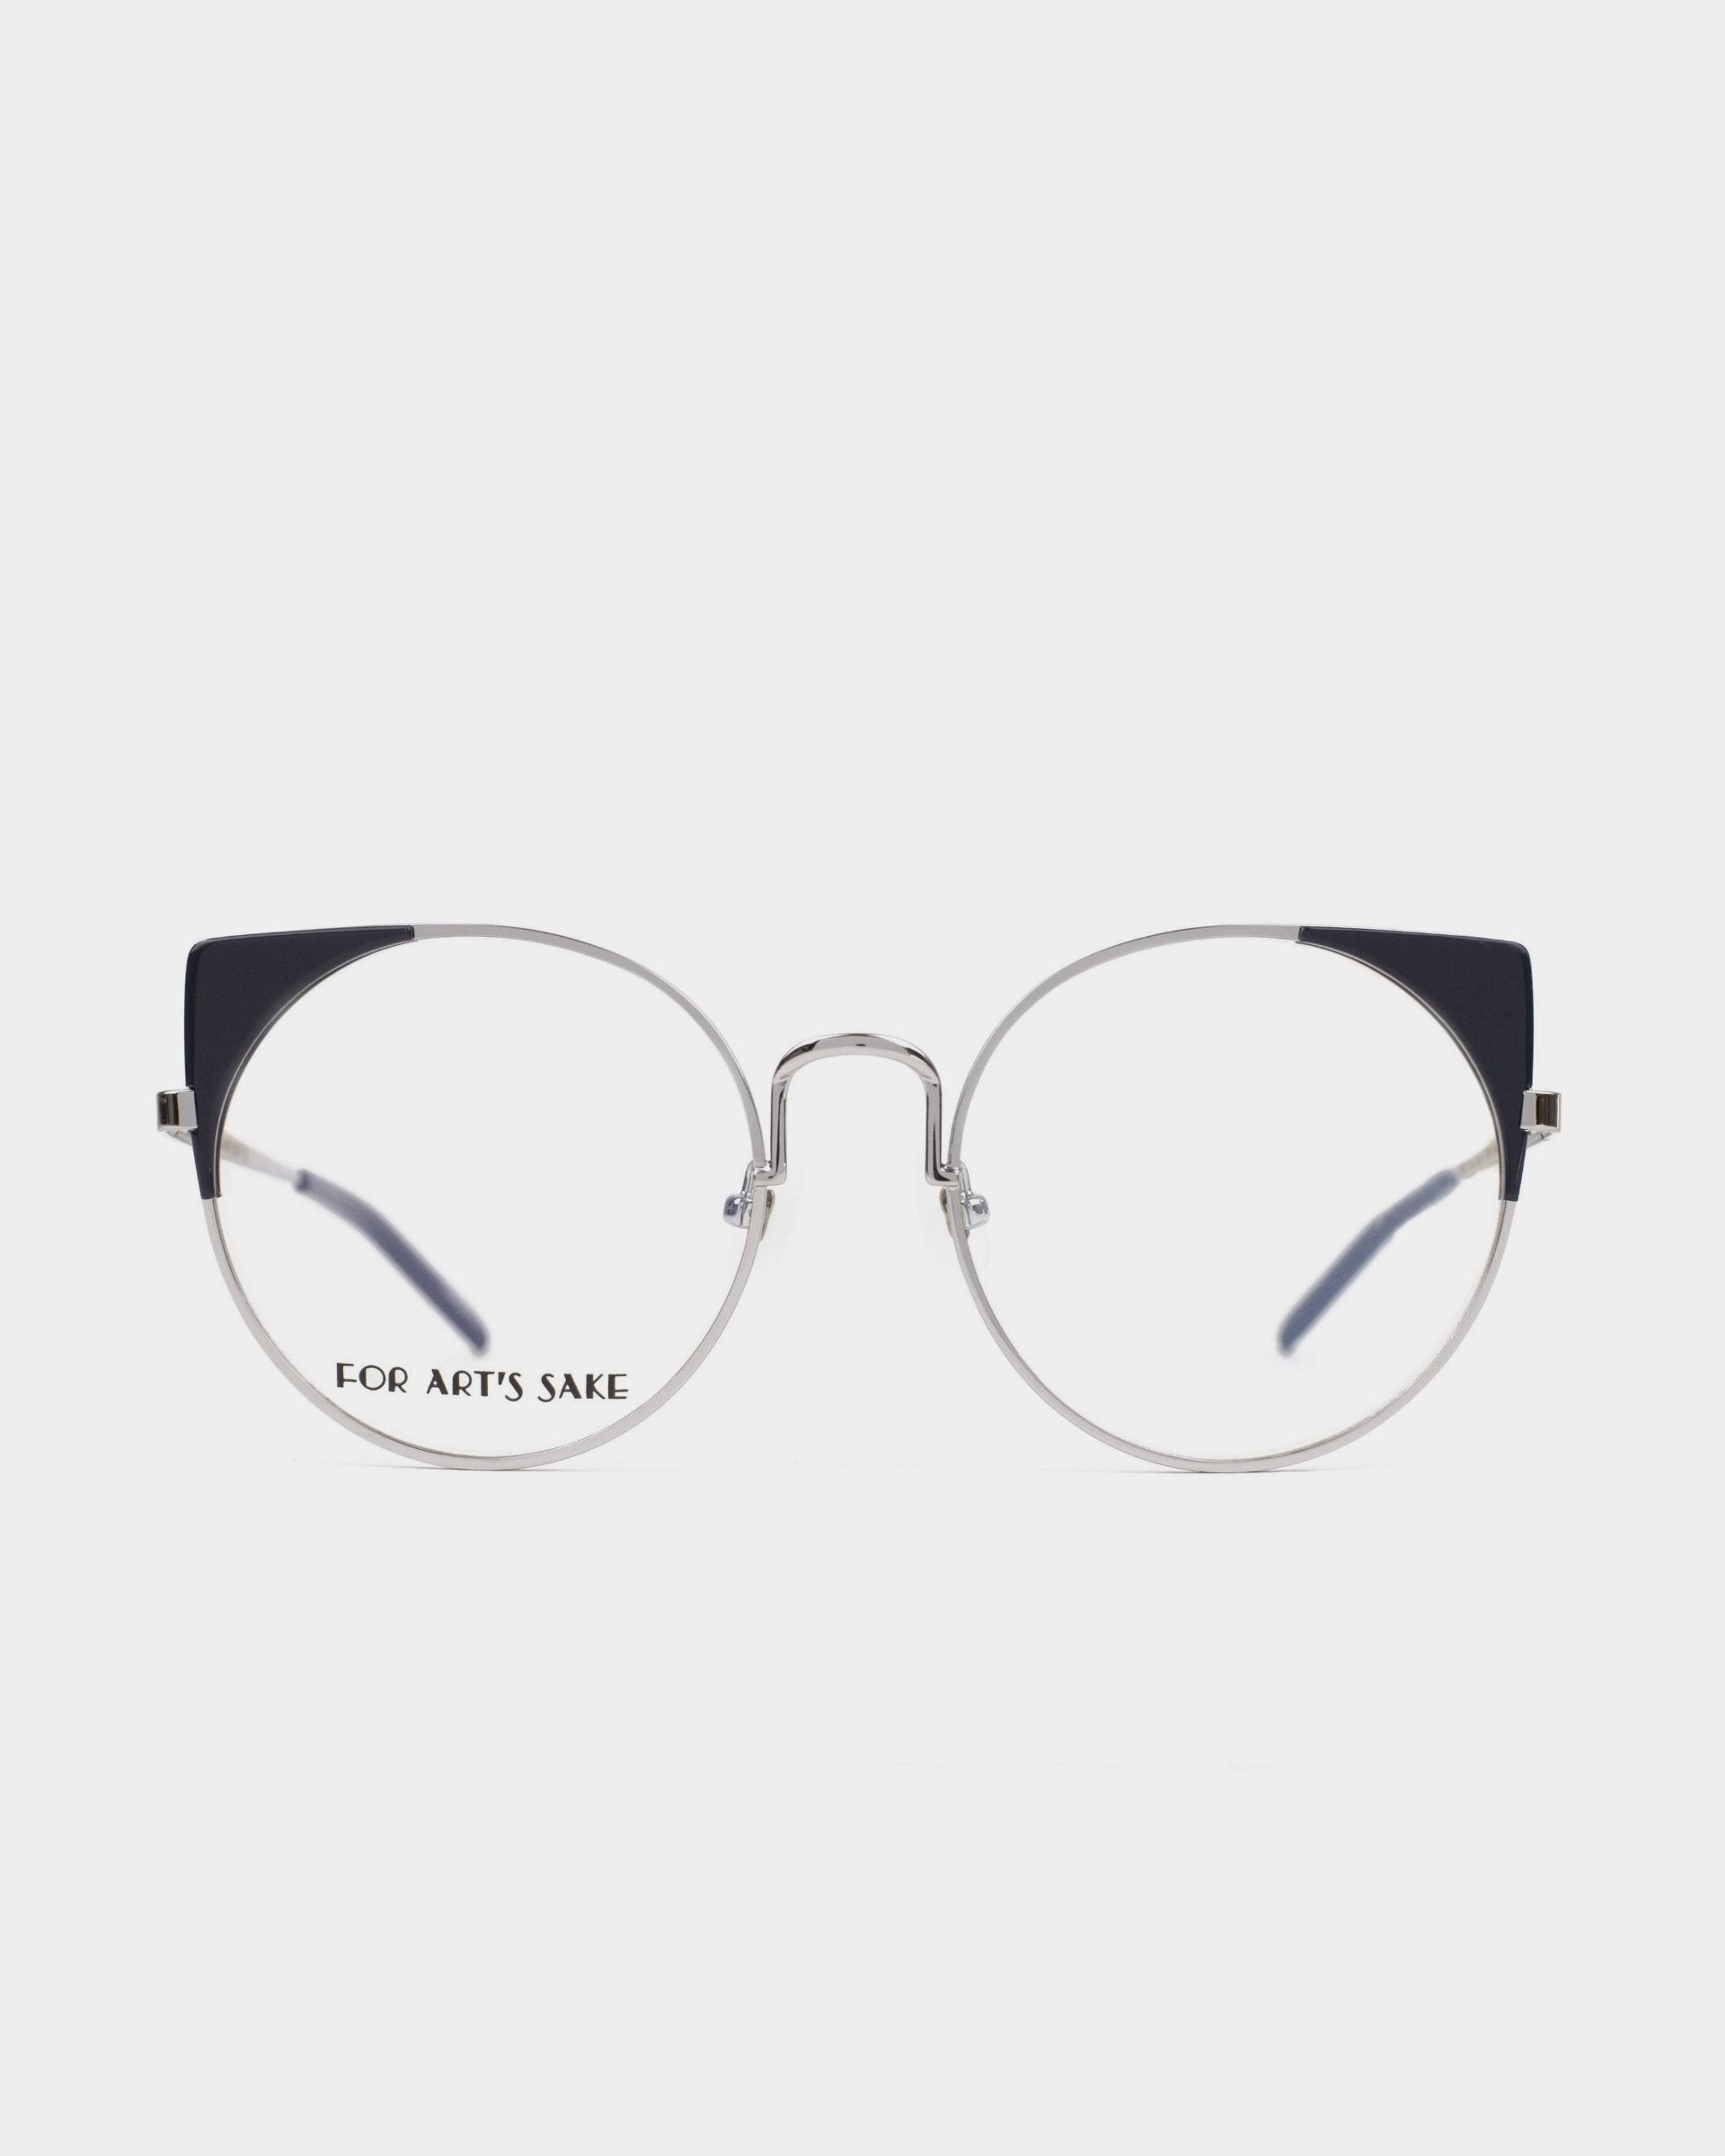 A pair of round, silver-framed Brisky eyeglasses with dark blue accents on the upper corners of the lenses. The left lens has the text &quot;For Art&#39;s Sake®&quot; on it. These stylish glasses also feature a blue light filter for added eye protection. The background is plain white.